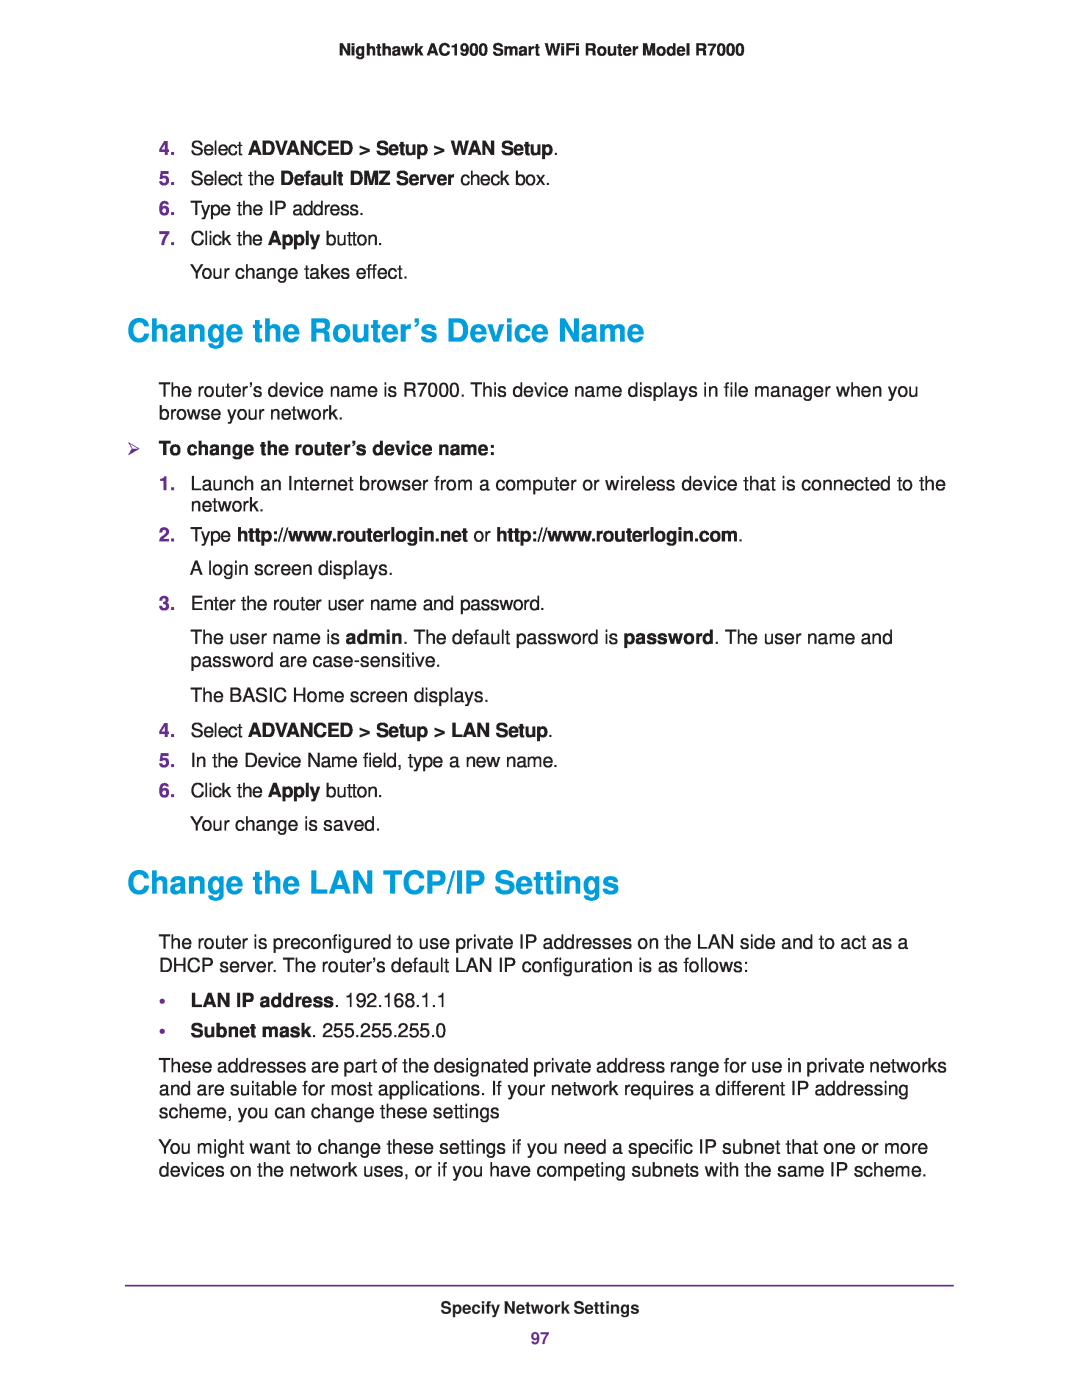 NETGEAR R7000 Change the Router’s Device Name, Change the LAN TCP/IP Settings,  To change the router’s device name 